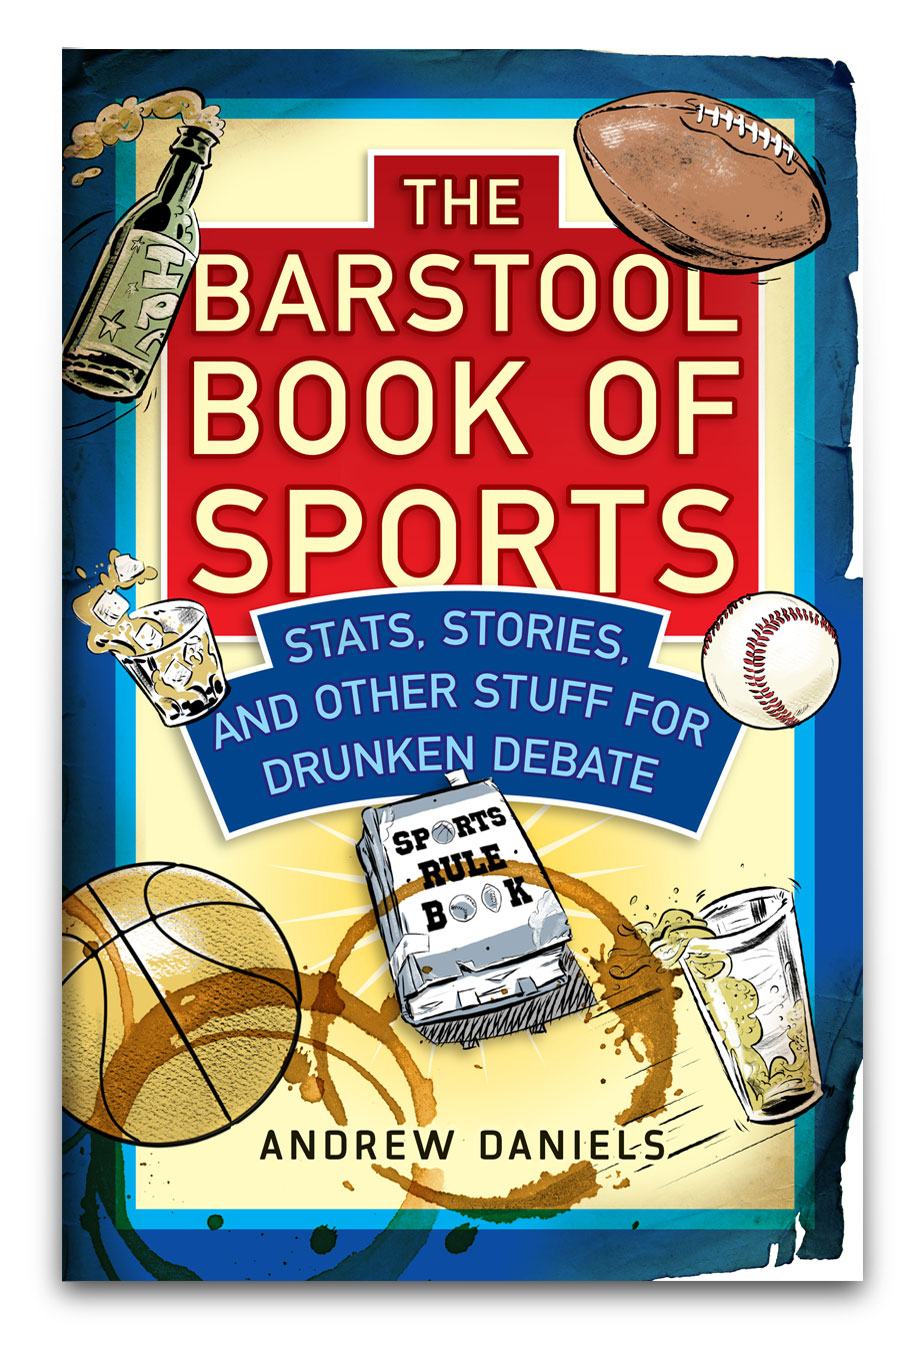 THE BARSTOOL BOOK OF SPORTS